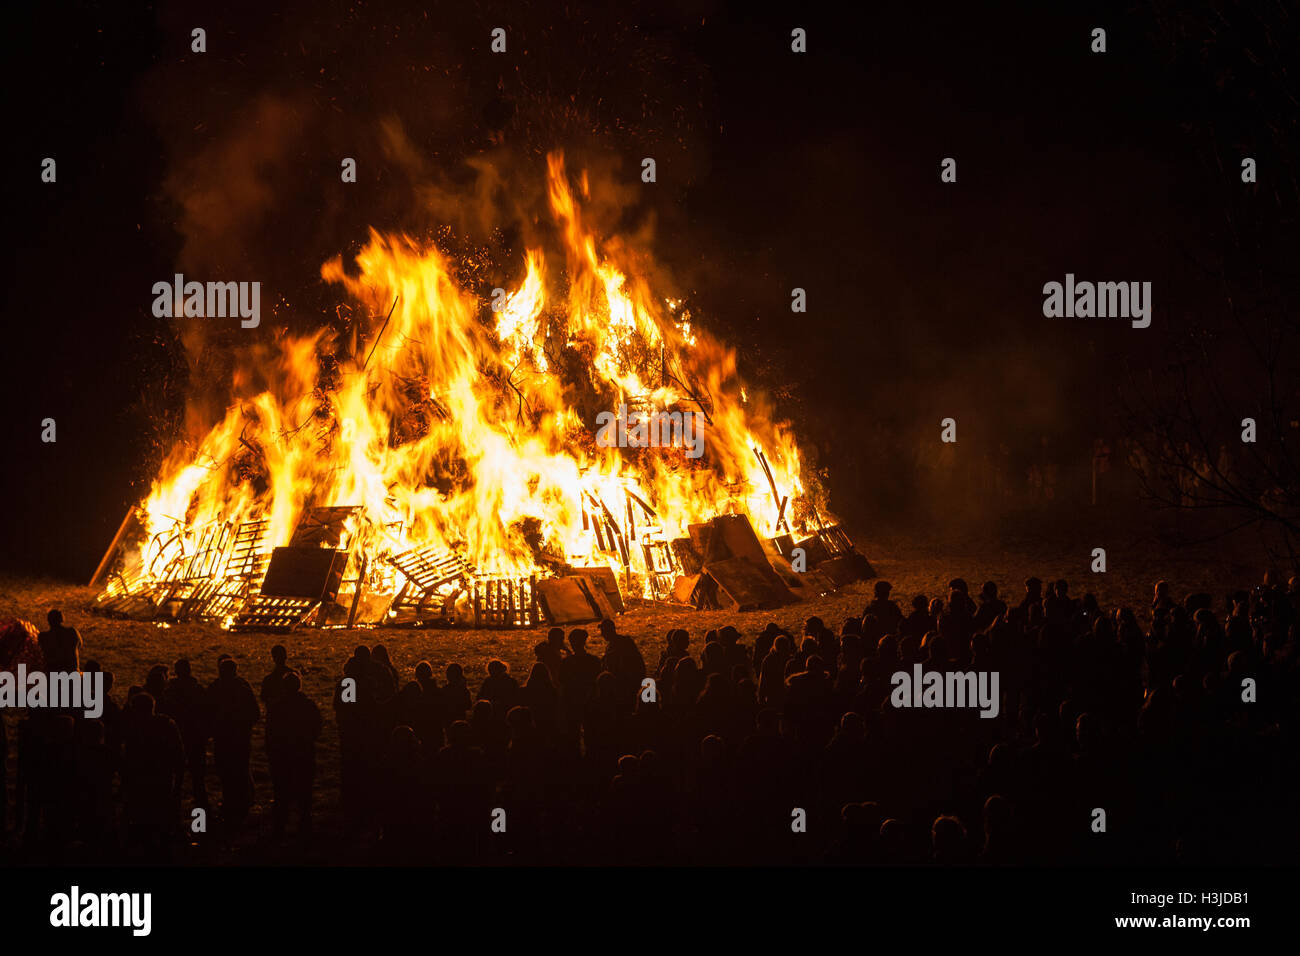 Bonfire Night, believed to be Europe's largest bonfire at Guy Fawkes Night, at Ottery St Mary Tar Barrel Rolling event,Devon,England, UK Stock Photo